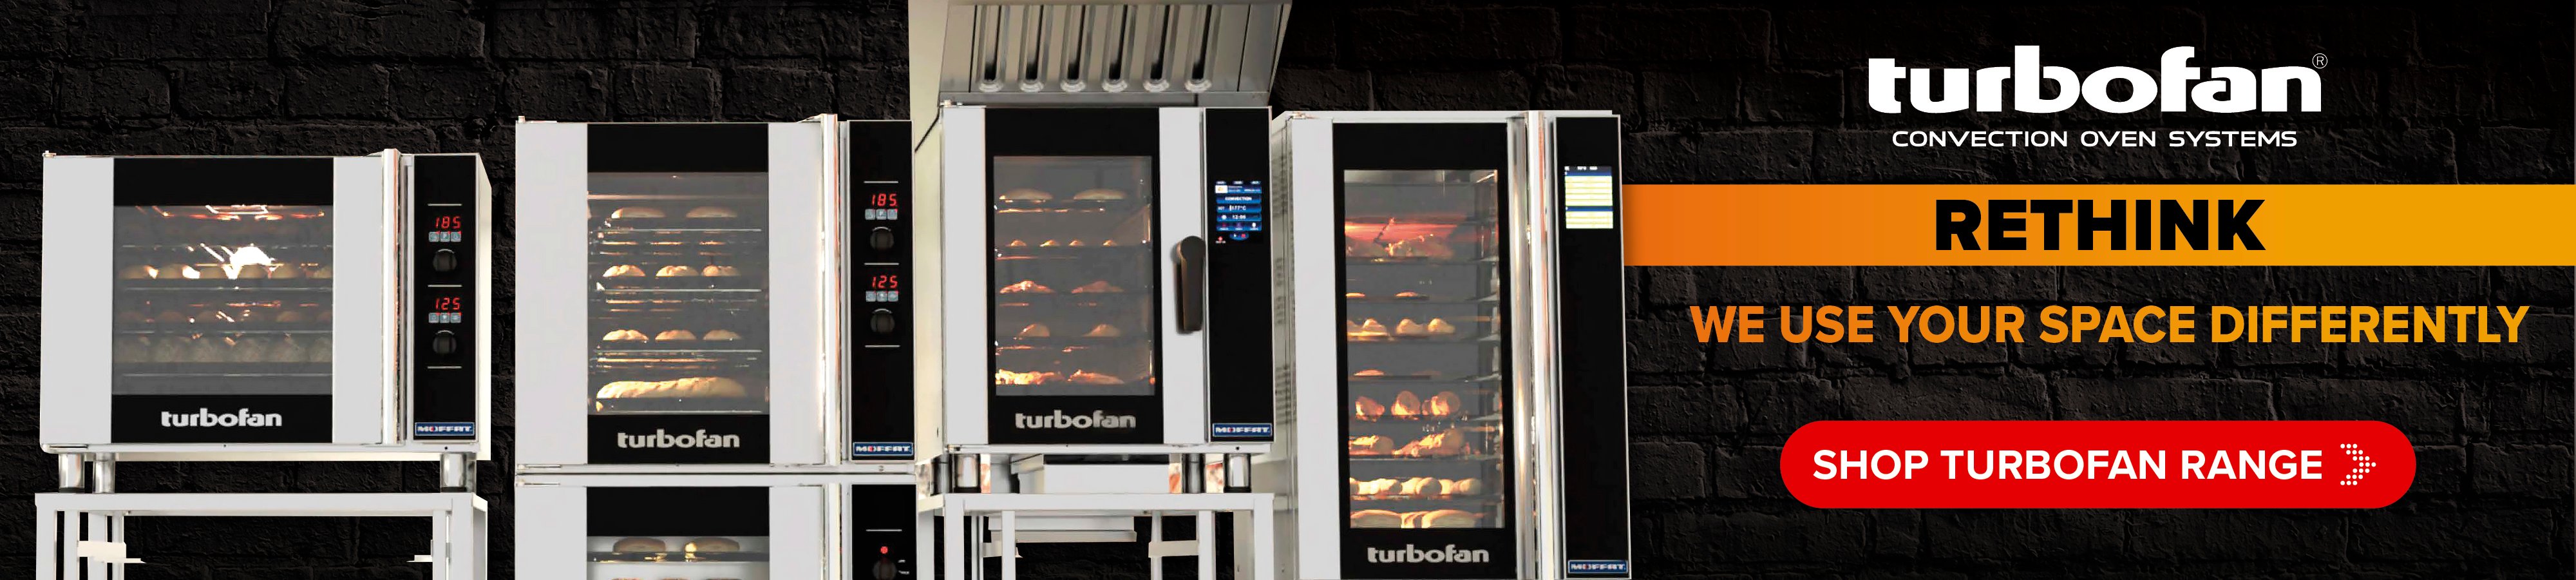 Turbofan convection oven systems